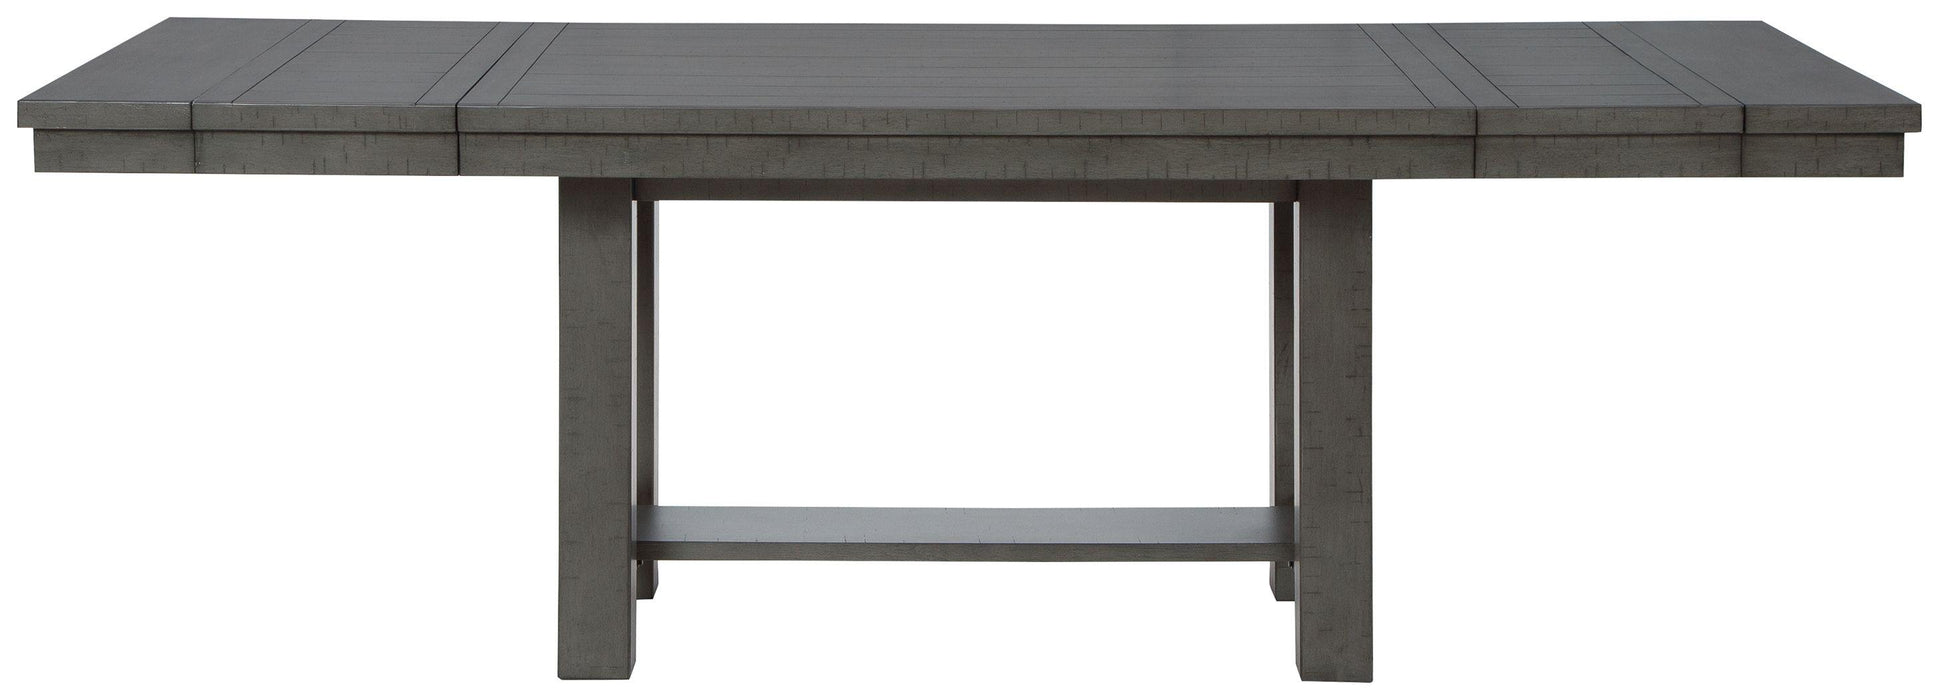 Myshanna - Rect Dining Room Ext Table